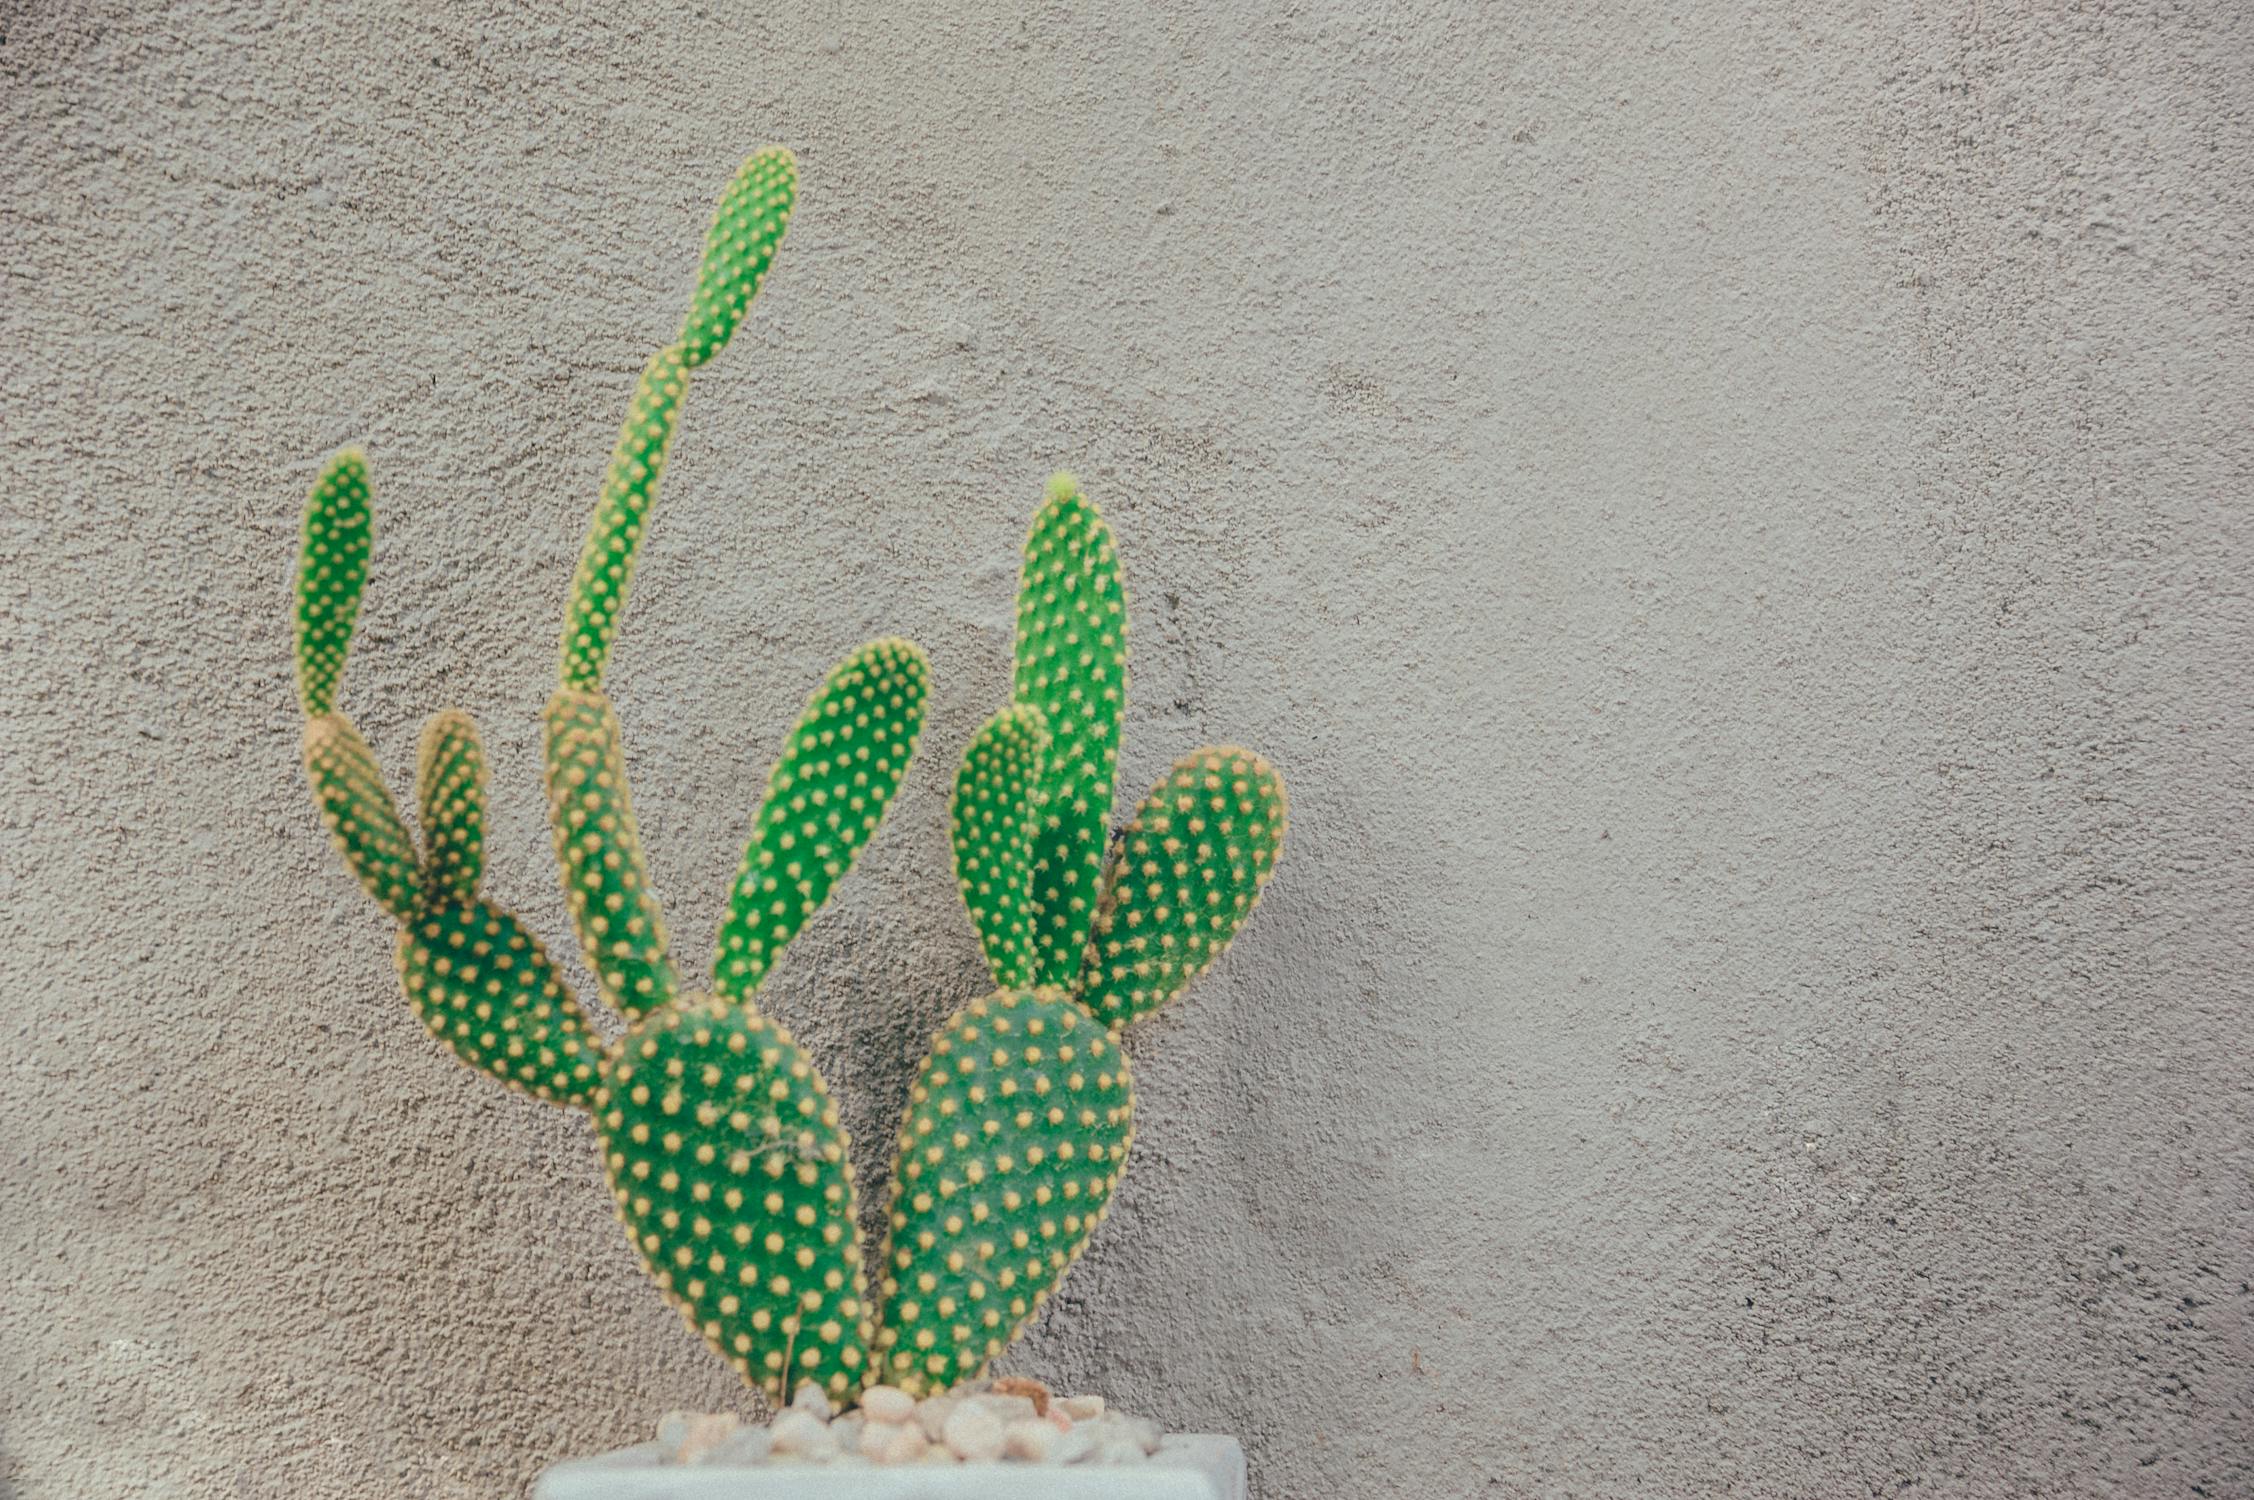 Cactus behind cement wall